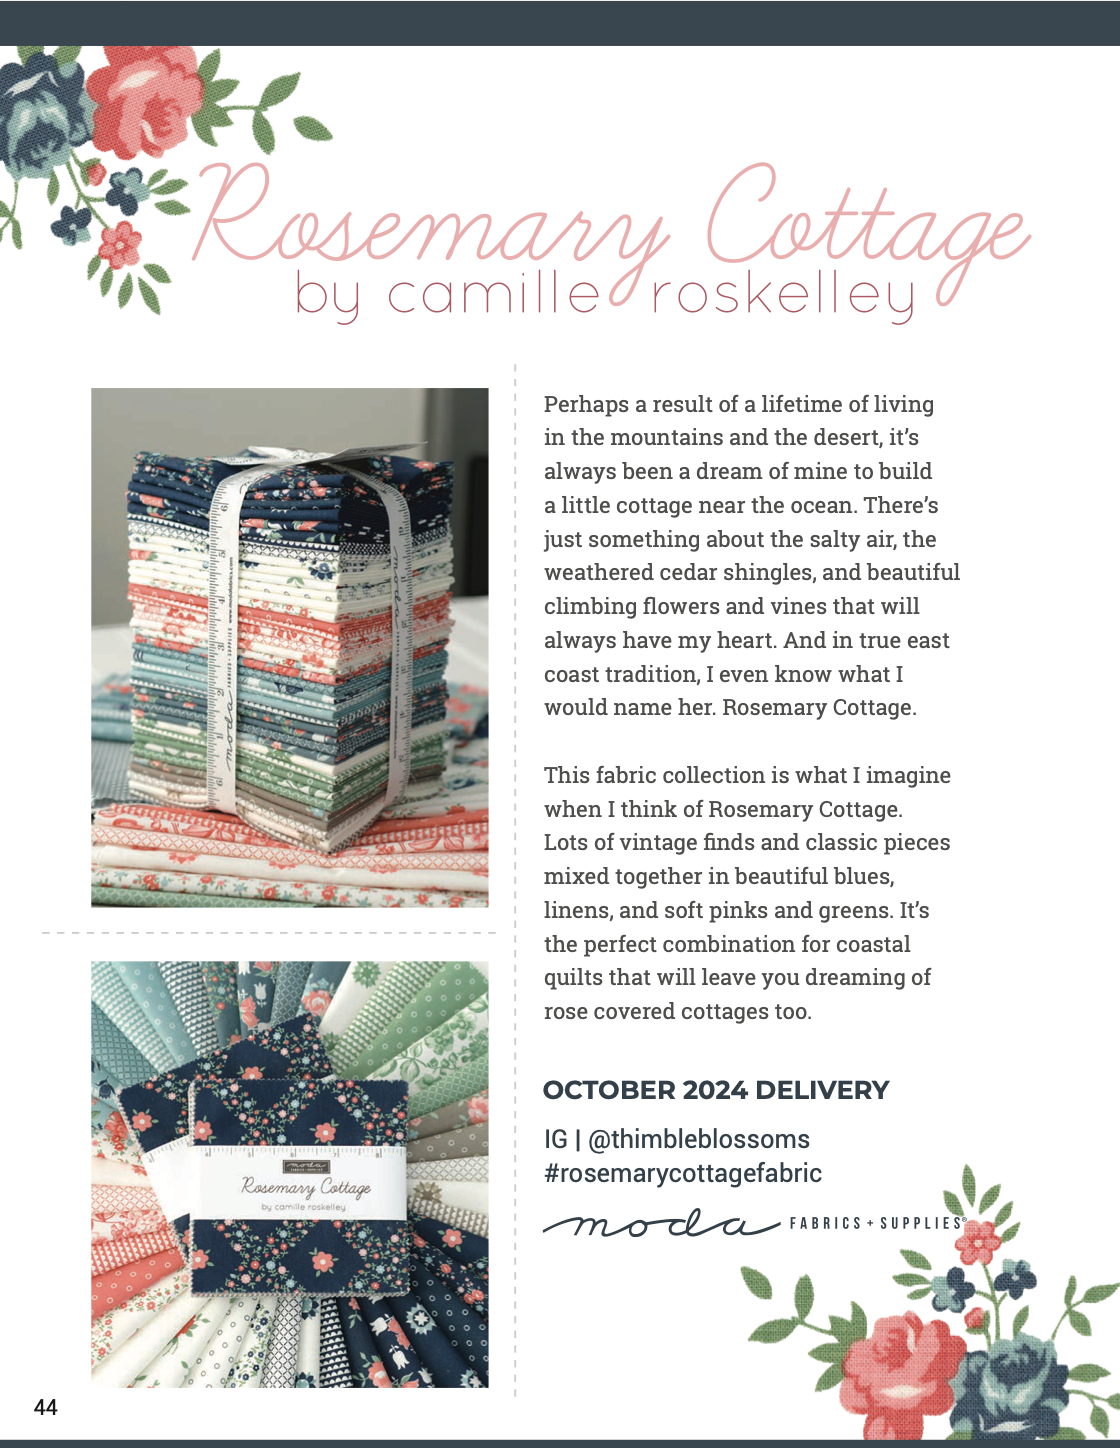 Rosemary Cottage by Camille Roskelly- Mini Charm Pack 55310MC